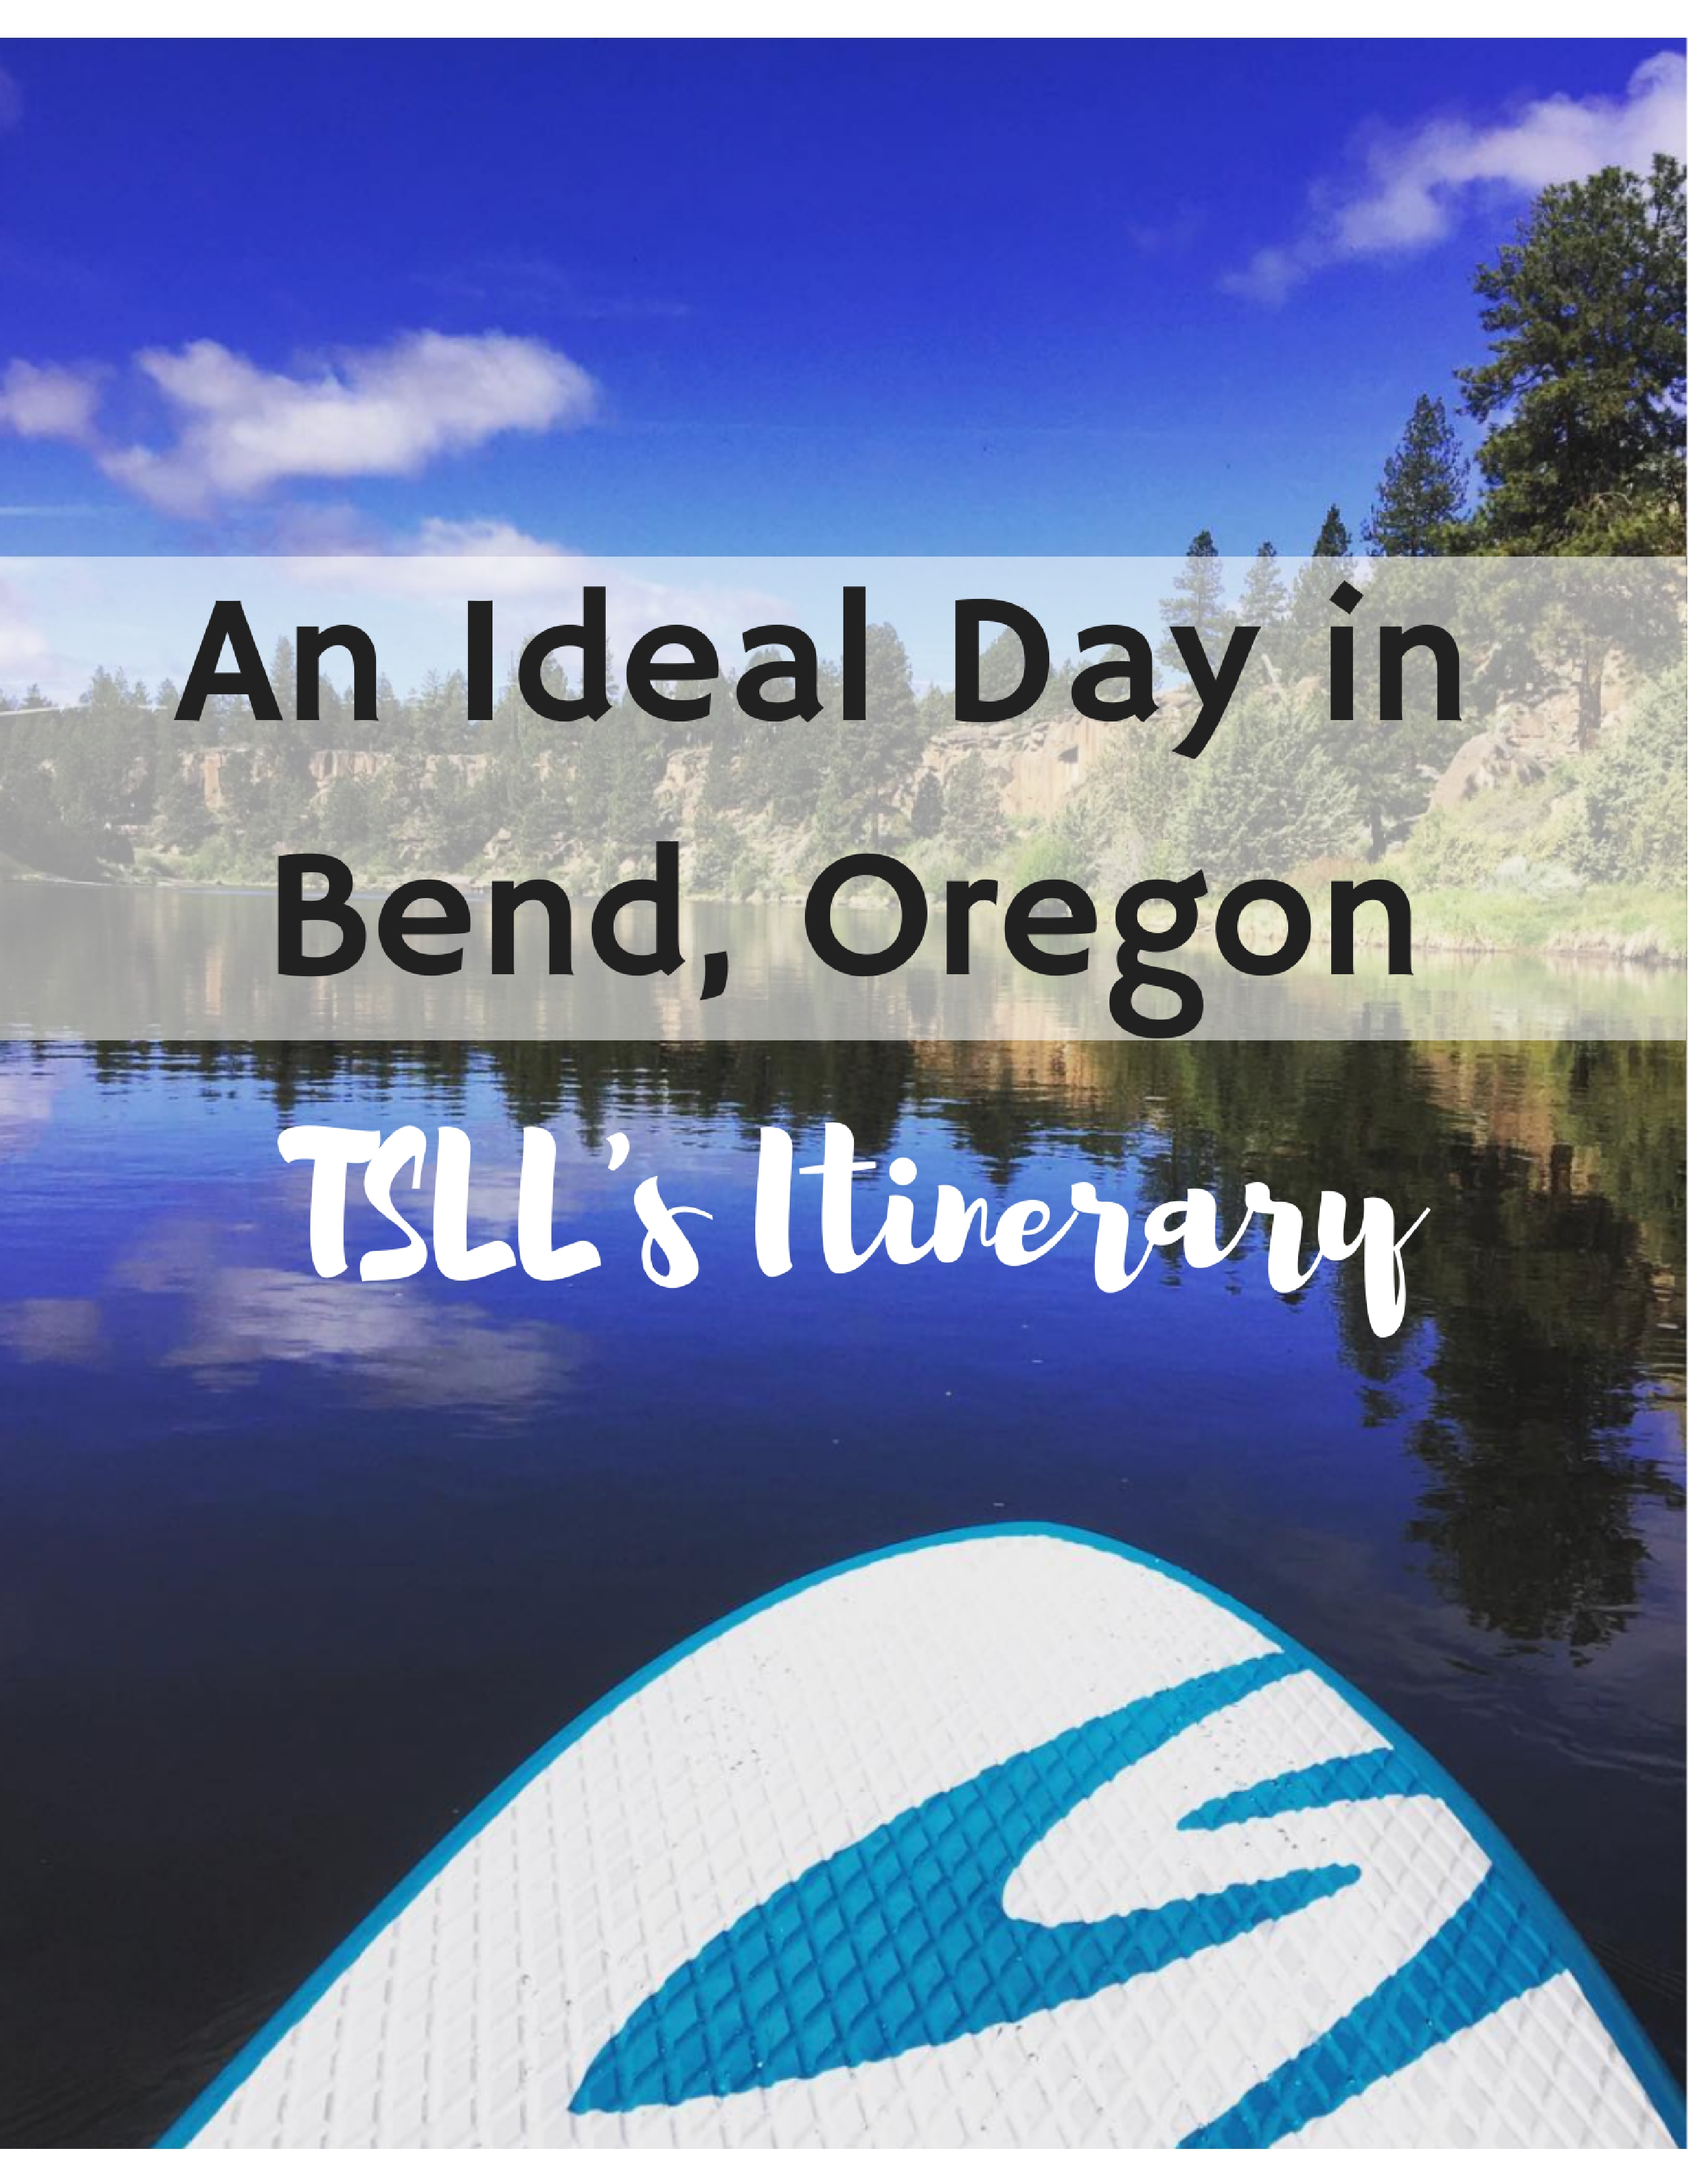 An Ideal Day in Bend, Oregon: TSLL’s Itinerary